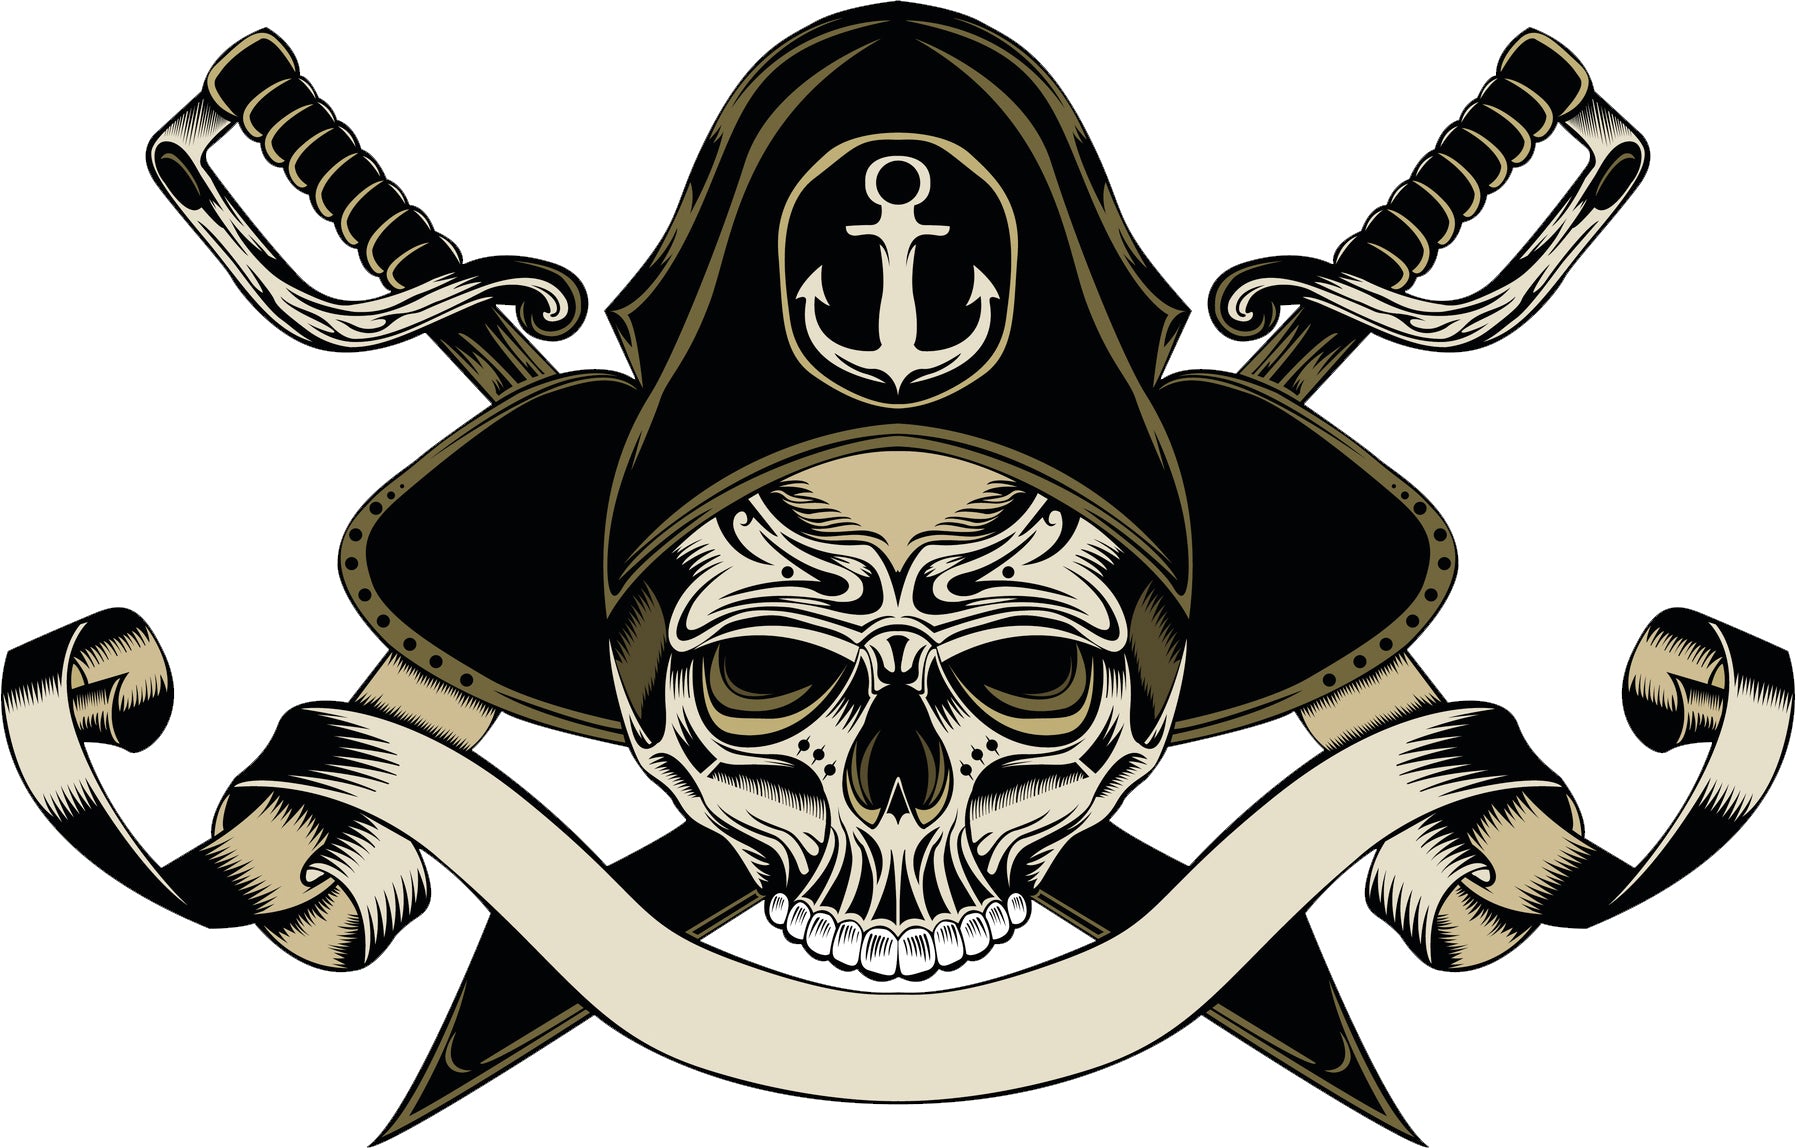 Pirate Skull with Captain Hat with Swords Cartoon Vinyl Decal Sticker